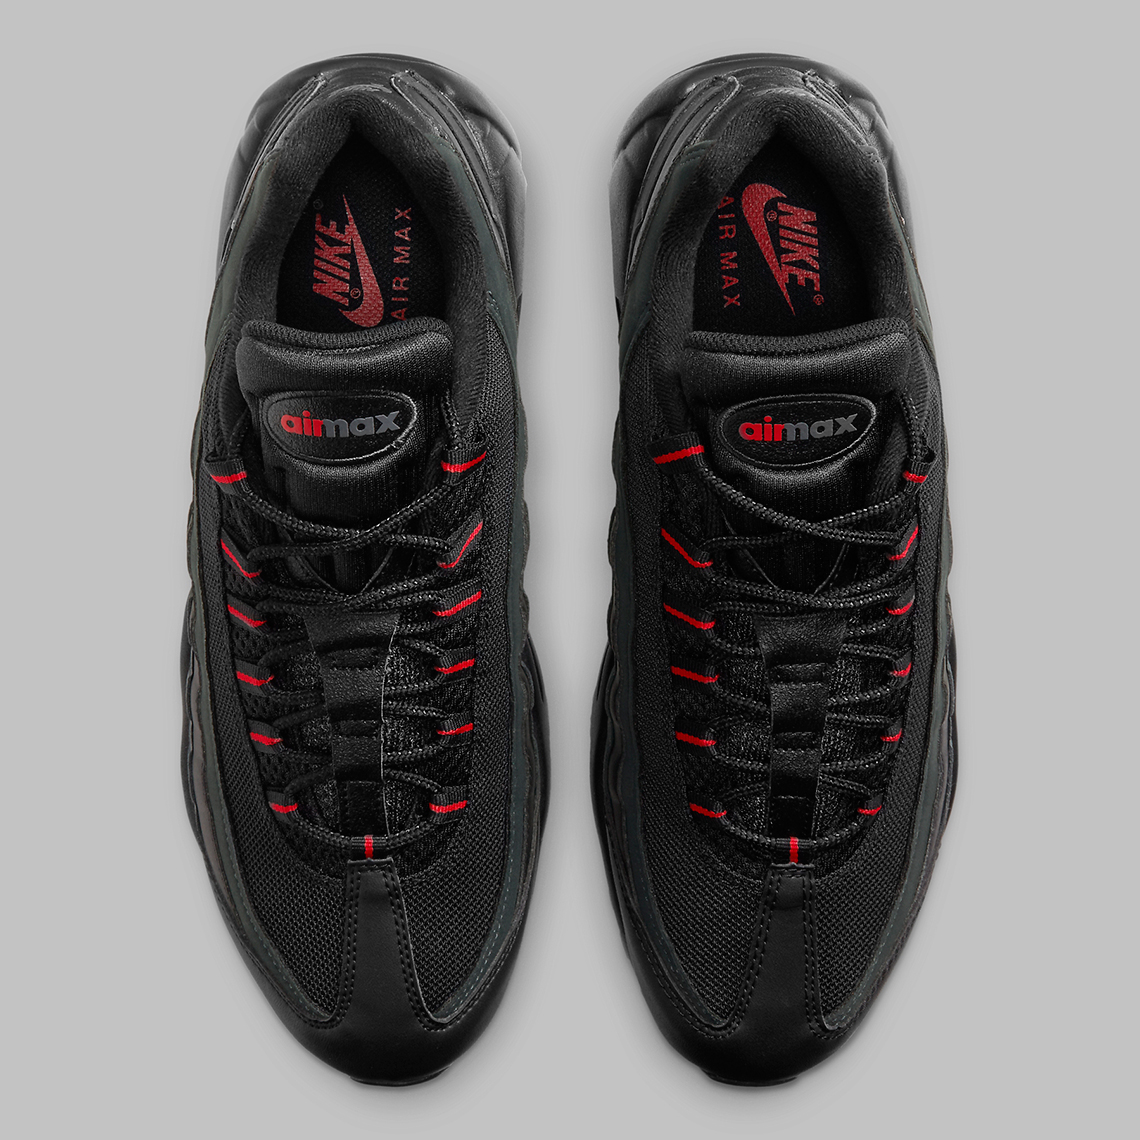 air max 95s black and red